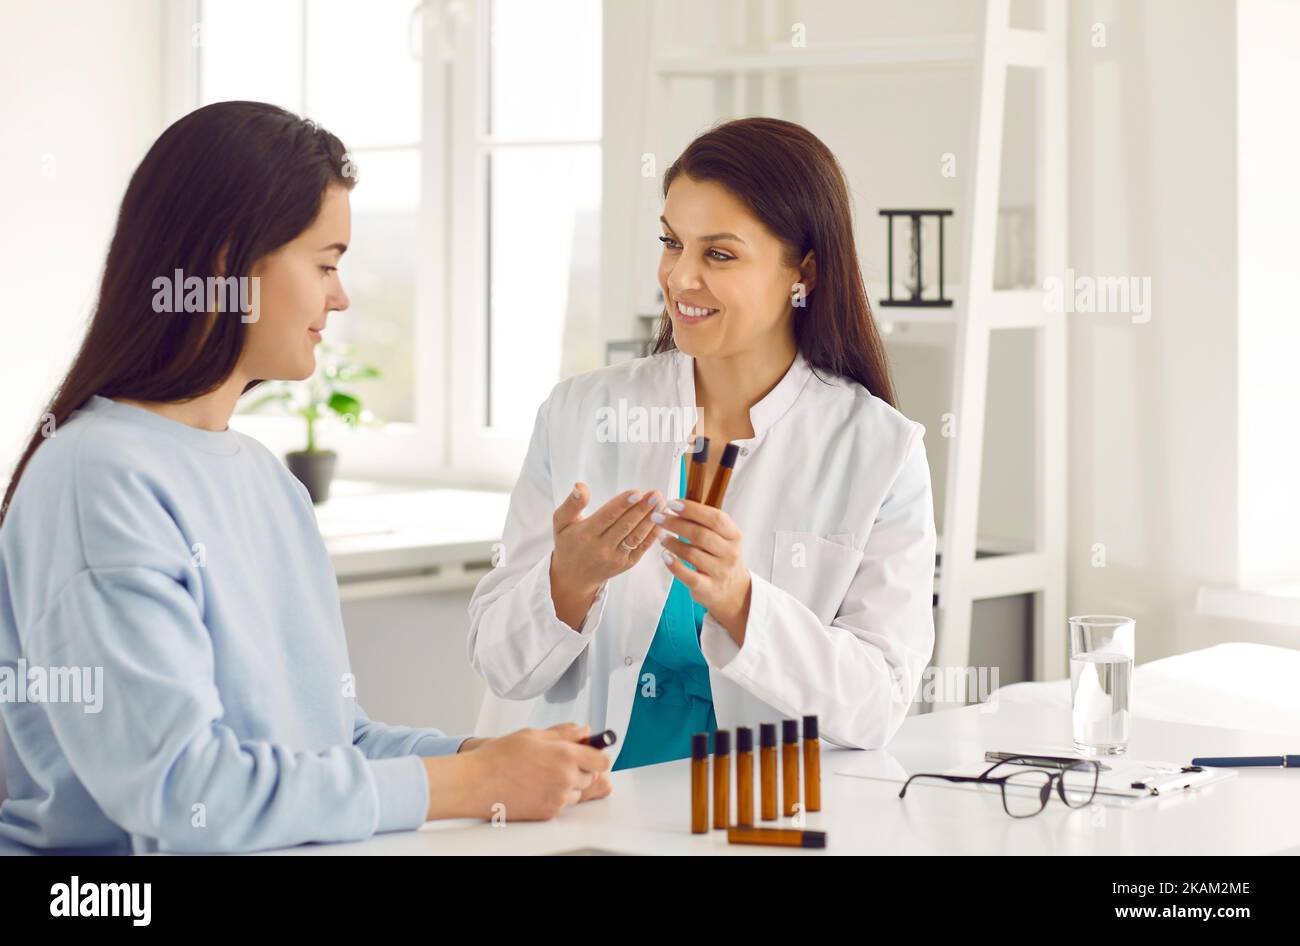 Friendly female doctor presents to young woman bottles of essential oils to improve well-being. Stock Photo